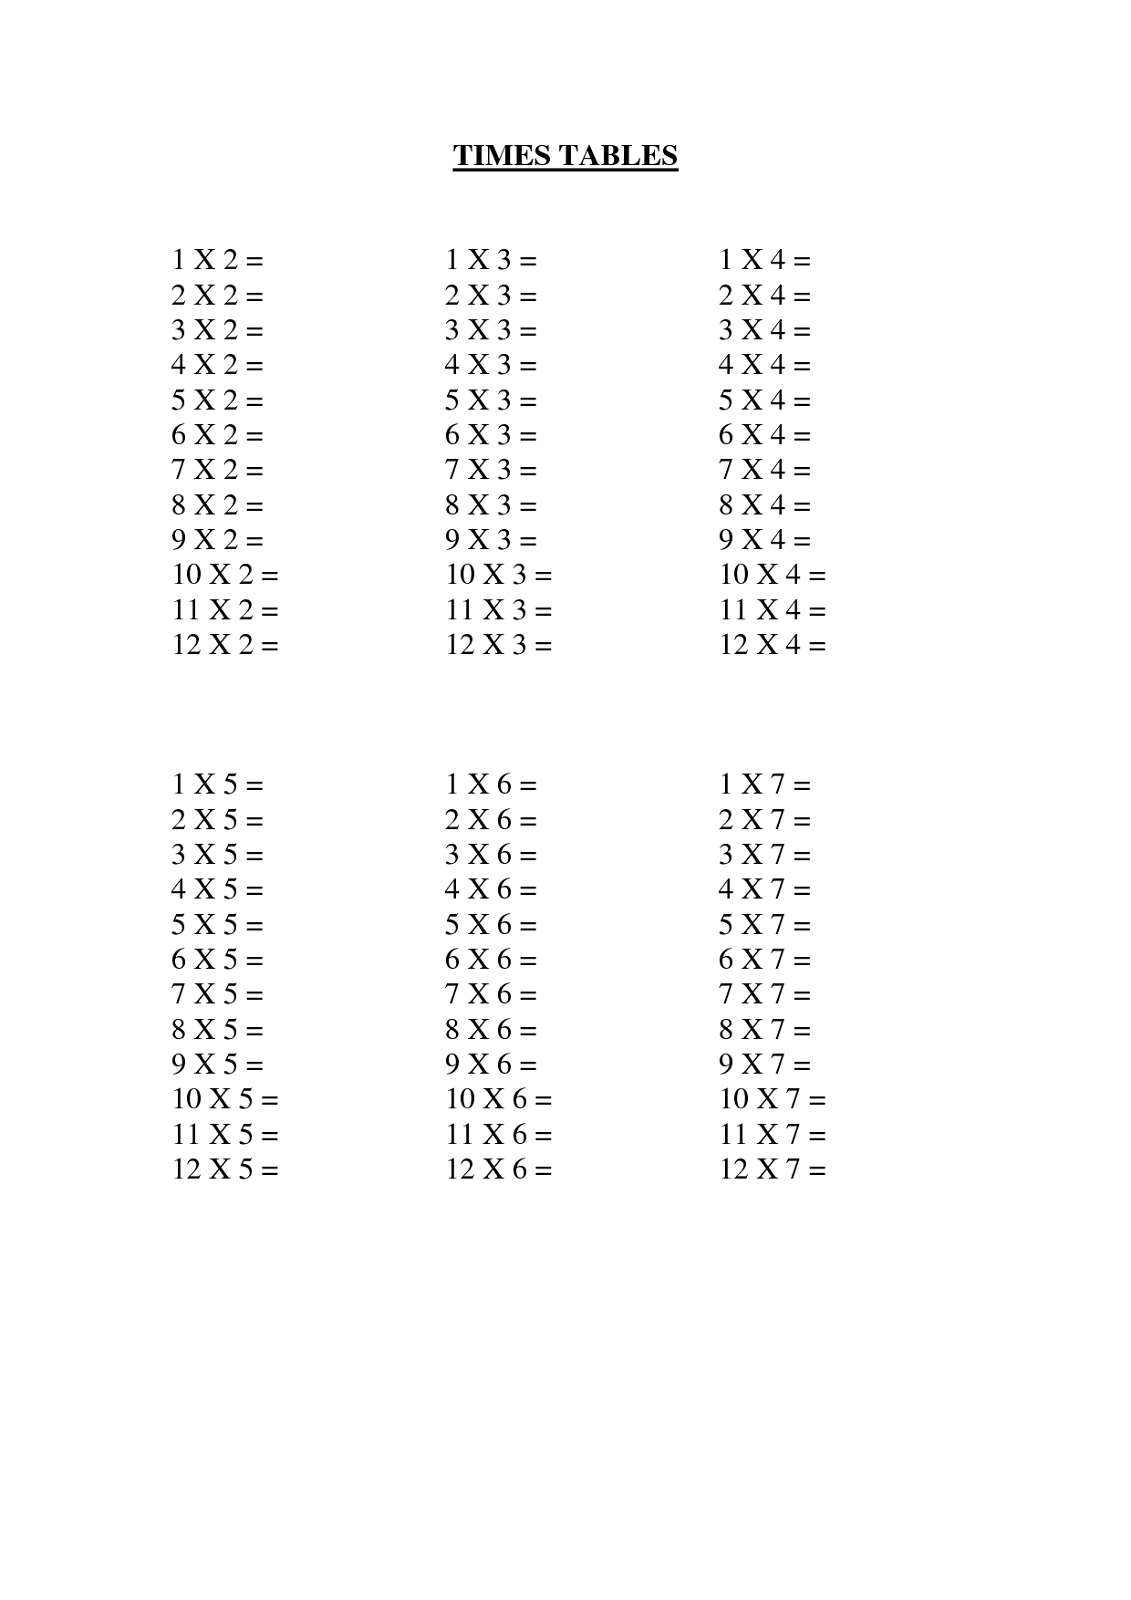 times table practice sheets printable